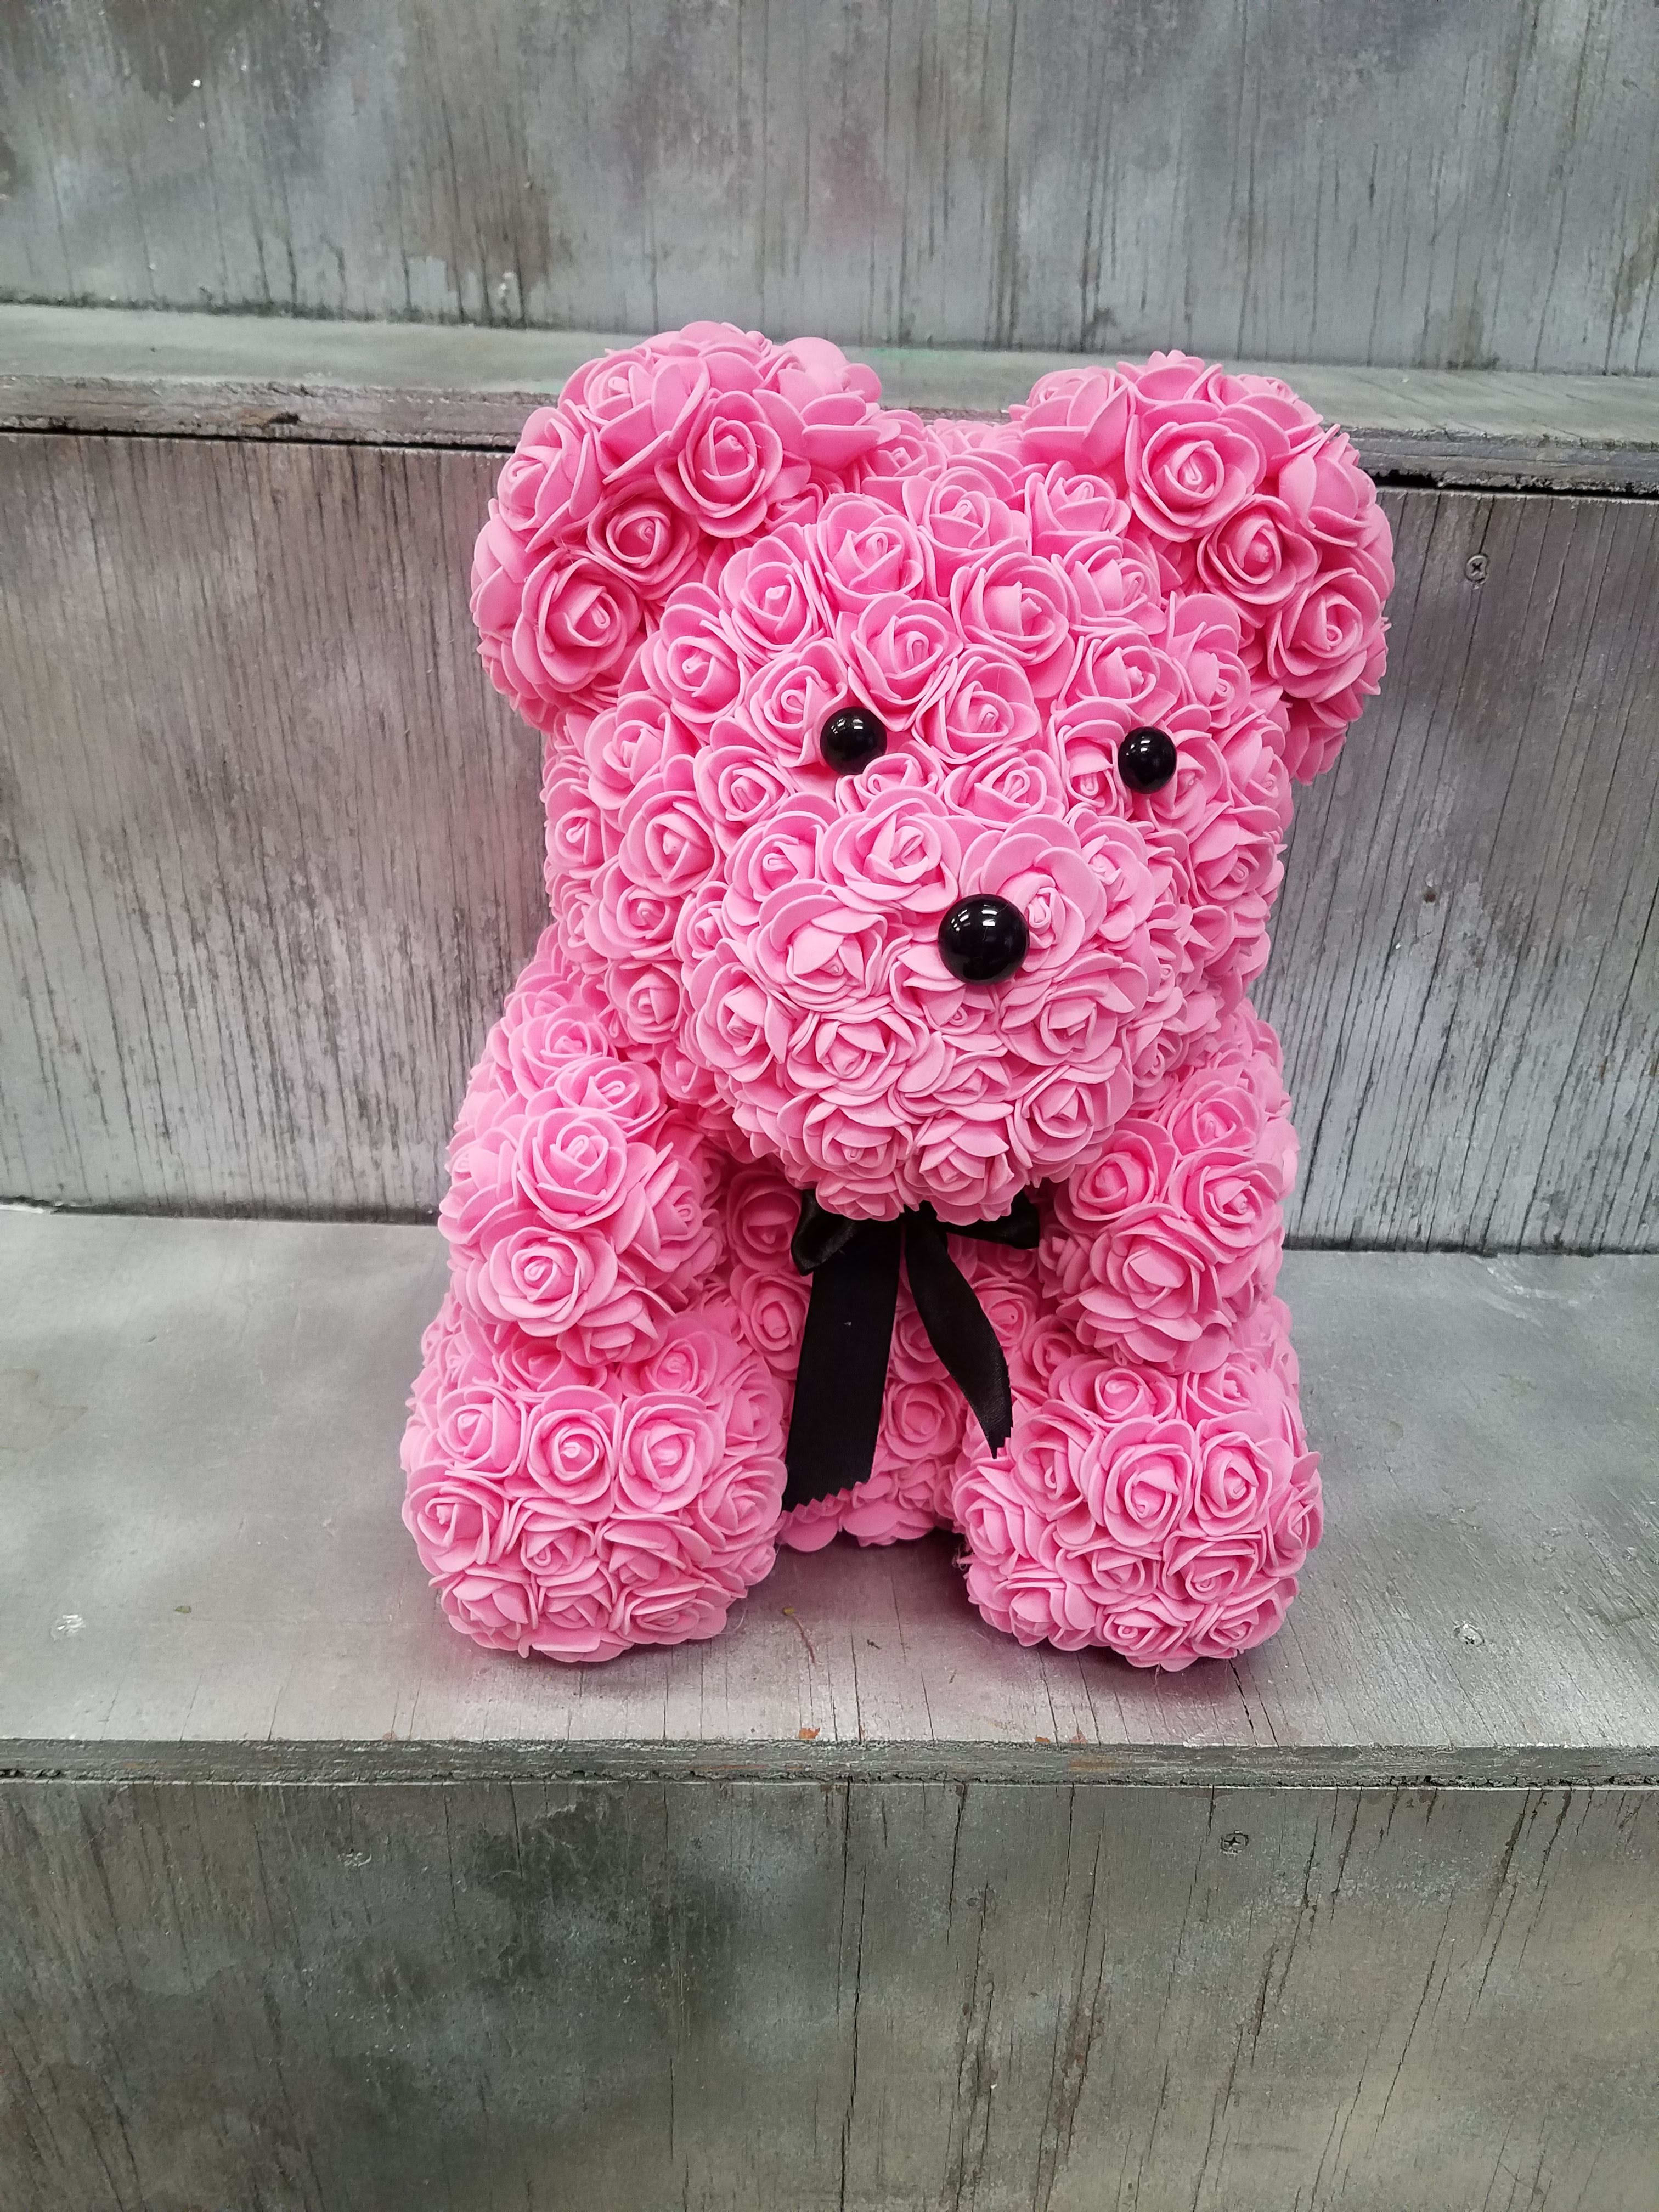 teddy bears made of roses